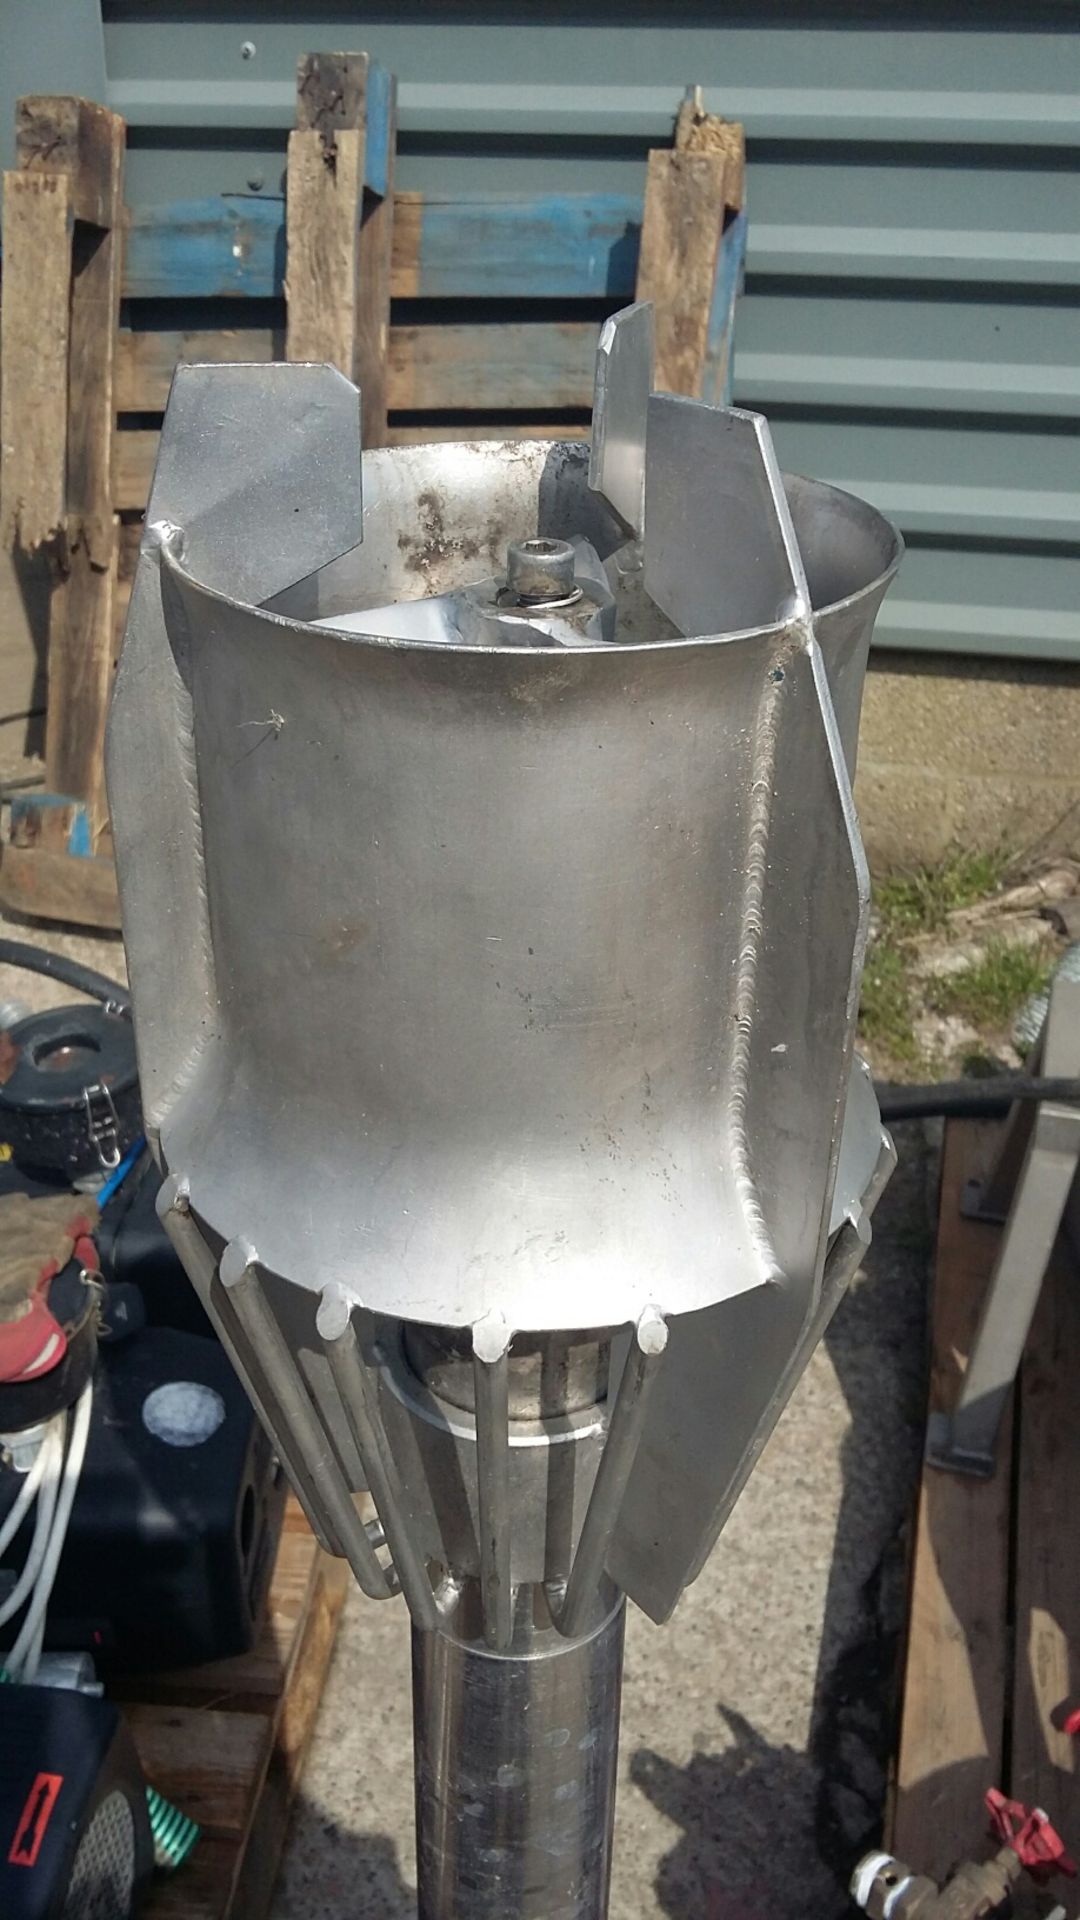 Y-Stral 1.5kW Stainless Steel High Speed Mixer - Image 3 of 4